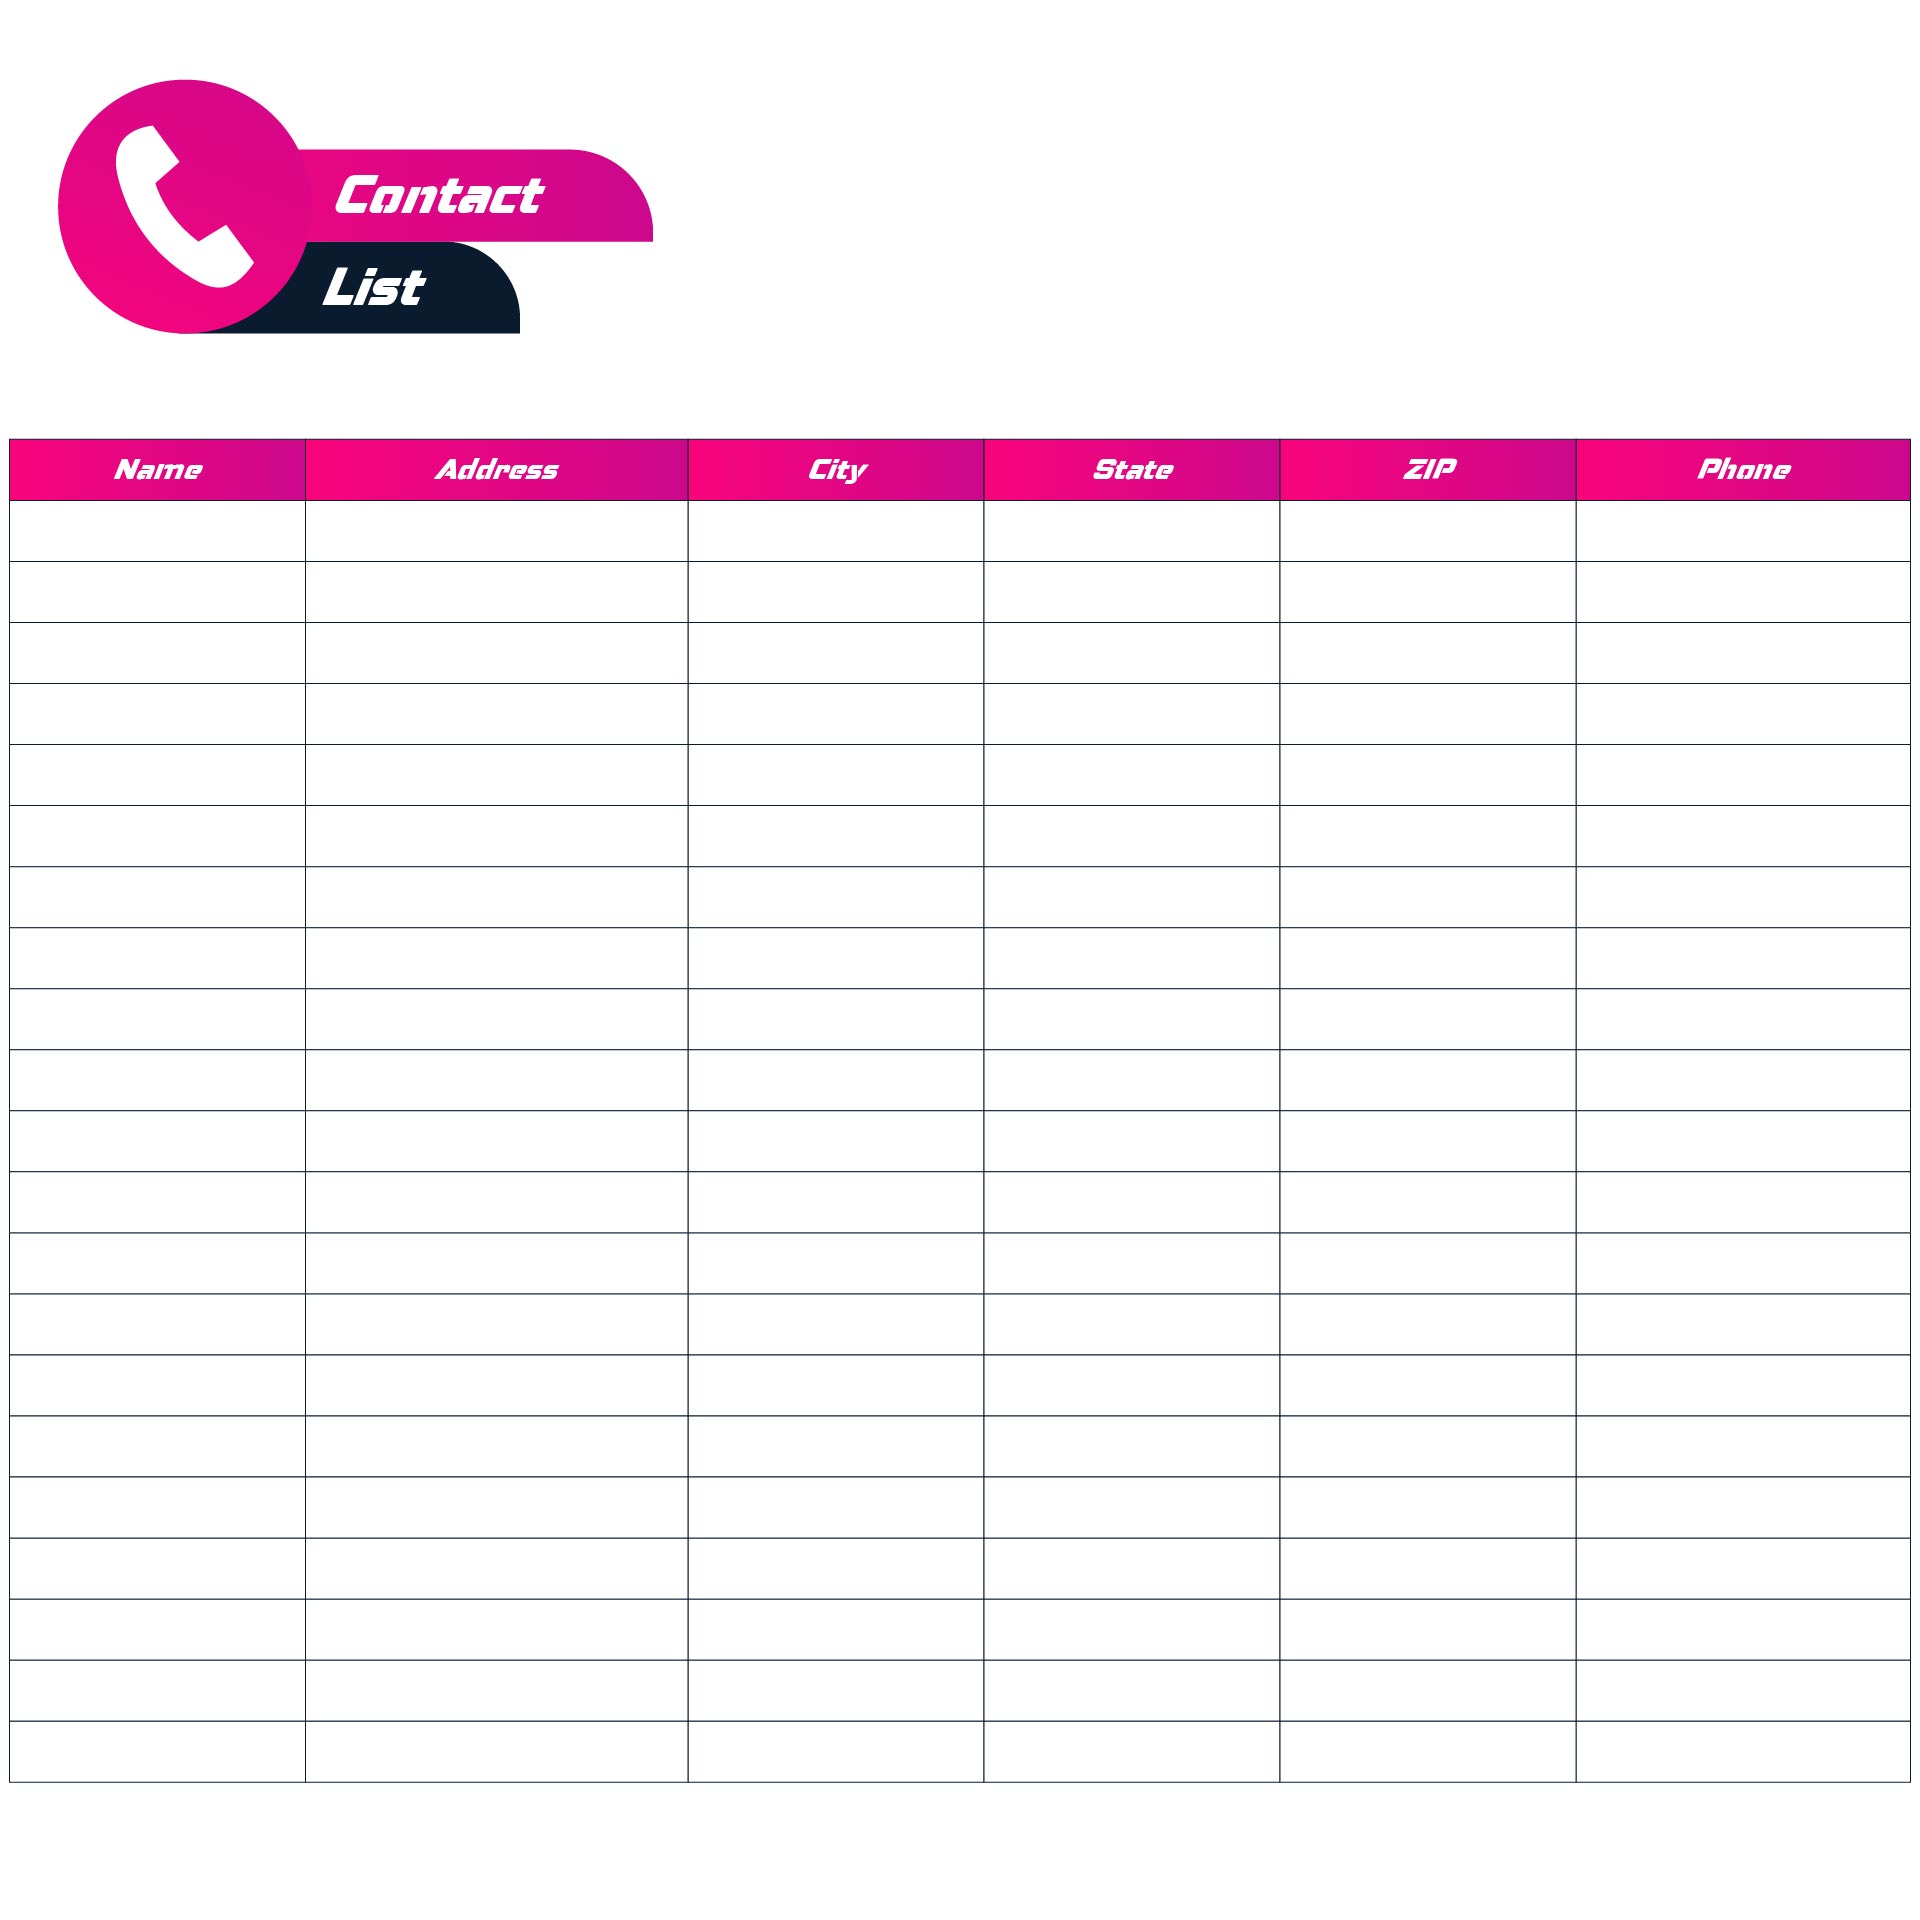 7 Best Images of Phone Book Template Printable - Printable Phone List